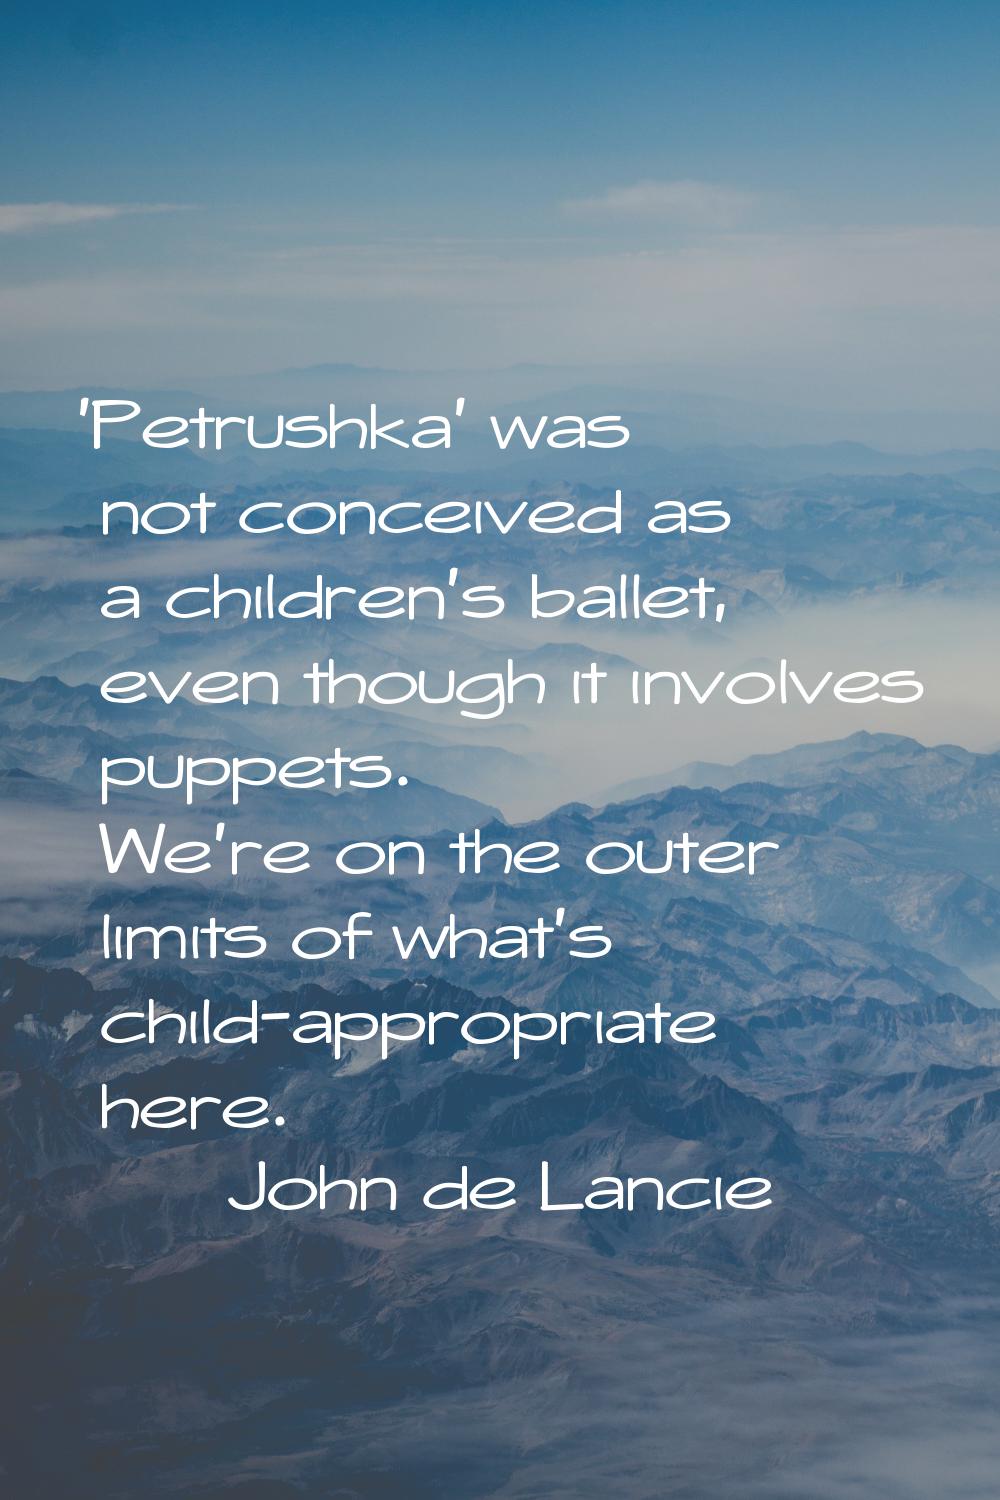 'Petrushka' was not conceived as a children's ballet, even though it involves puppets. We're on the